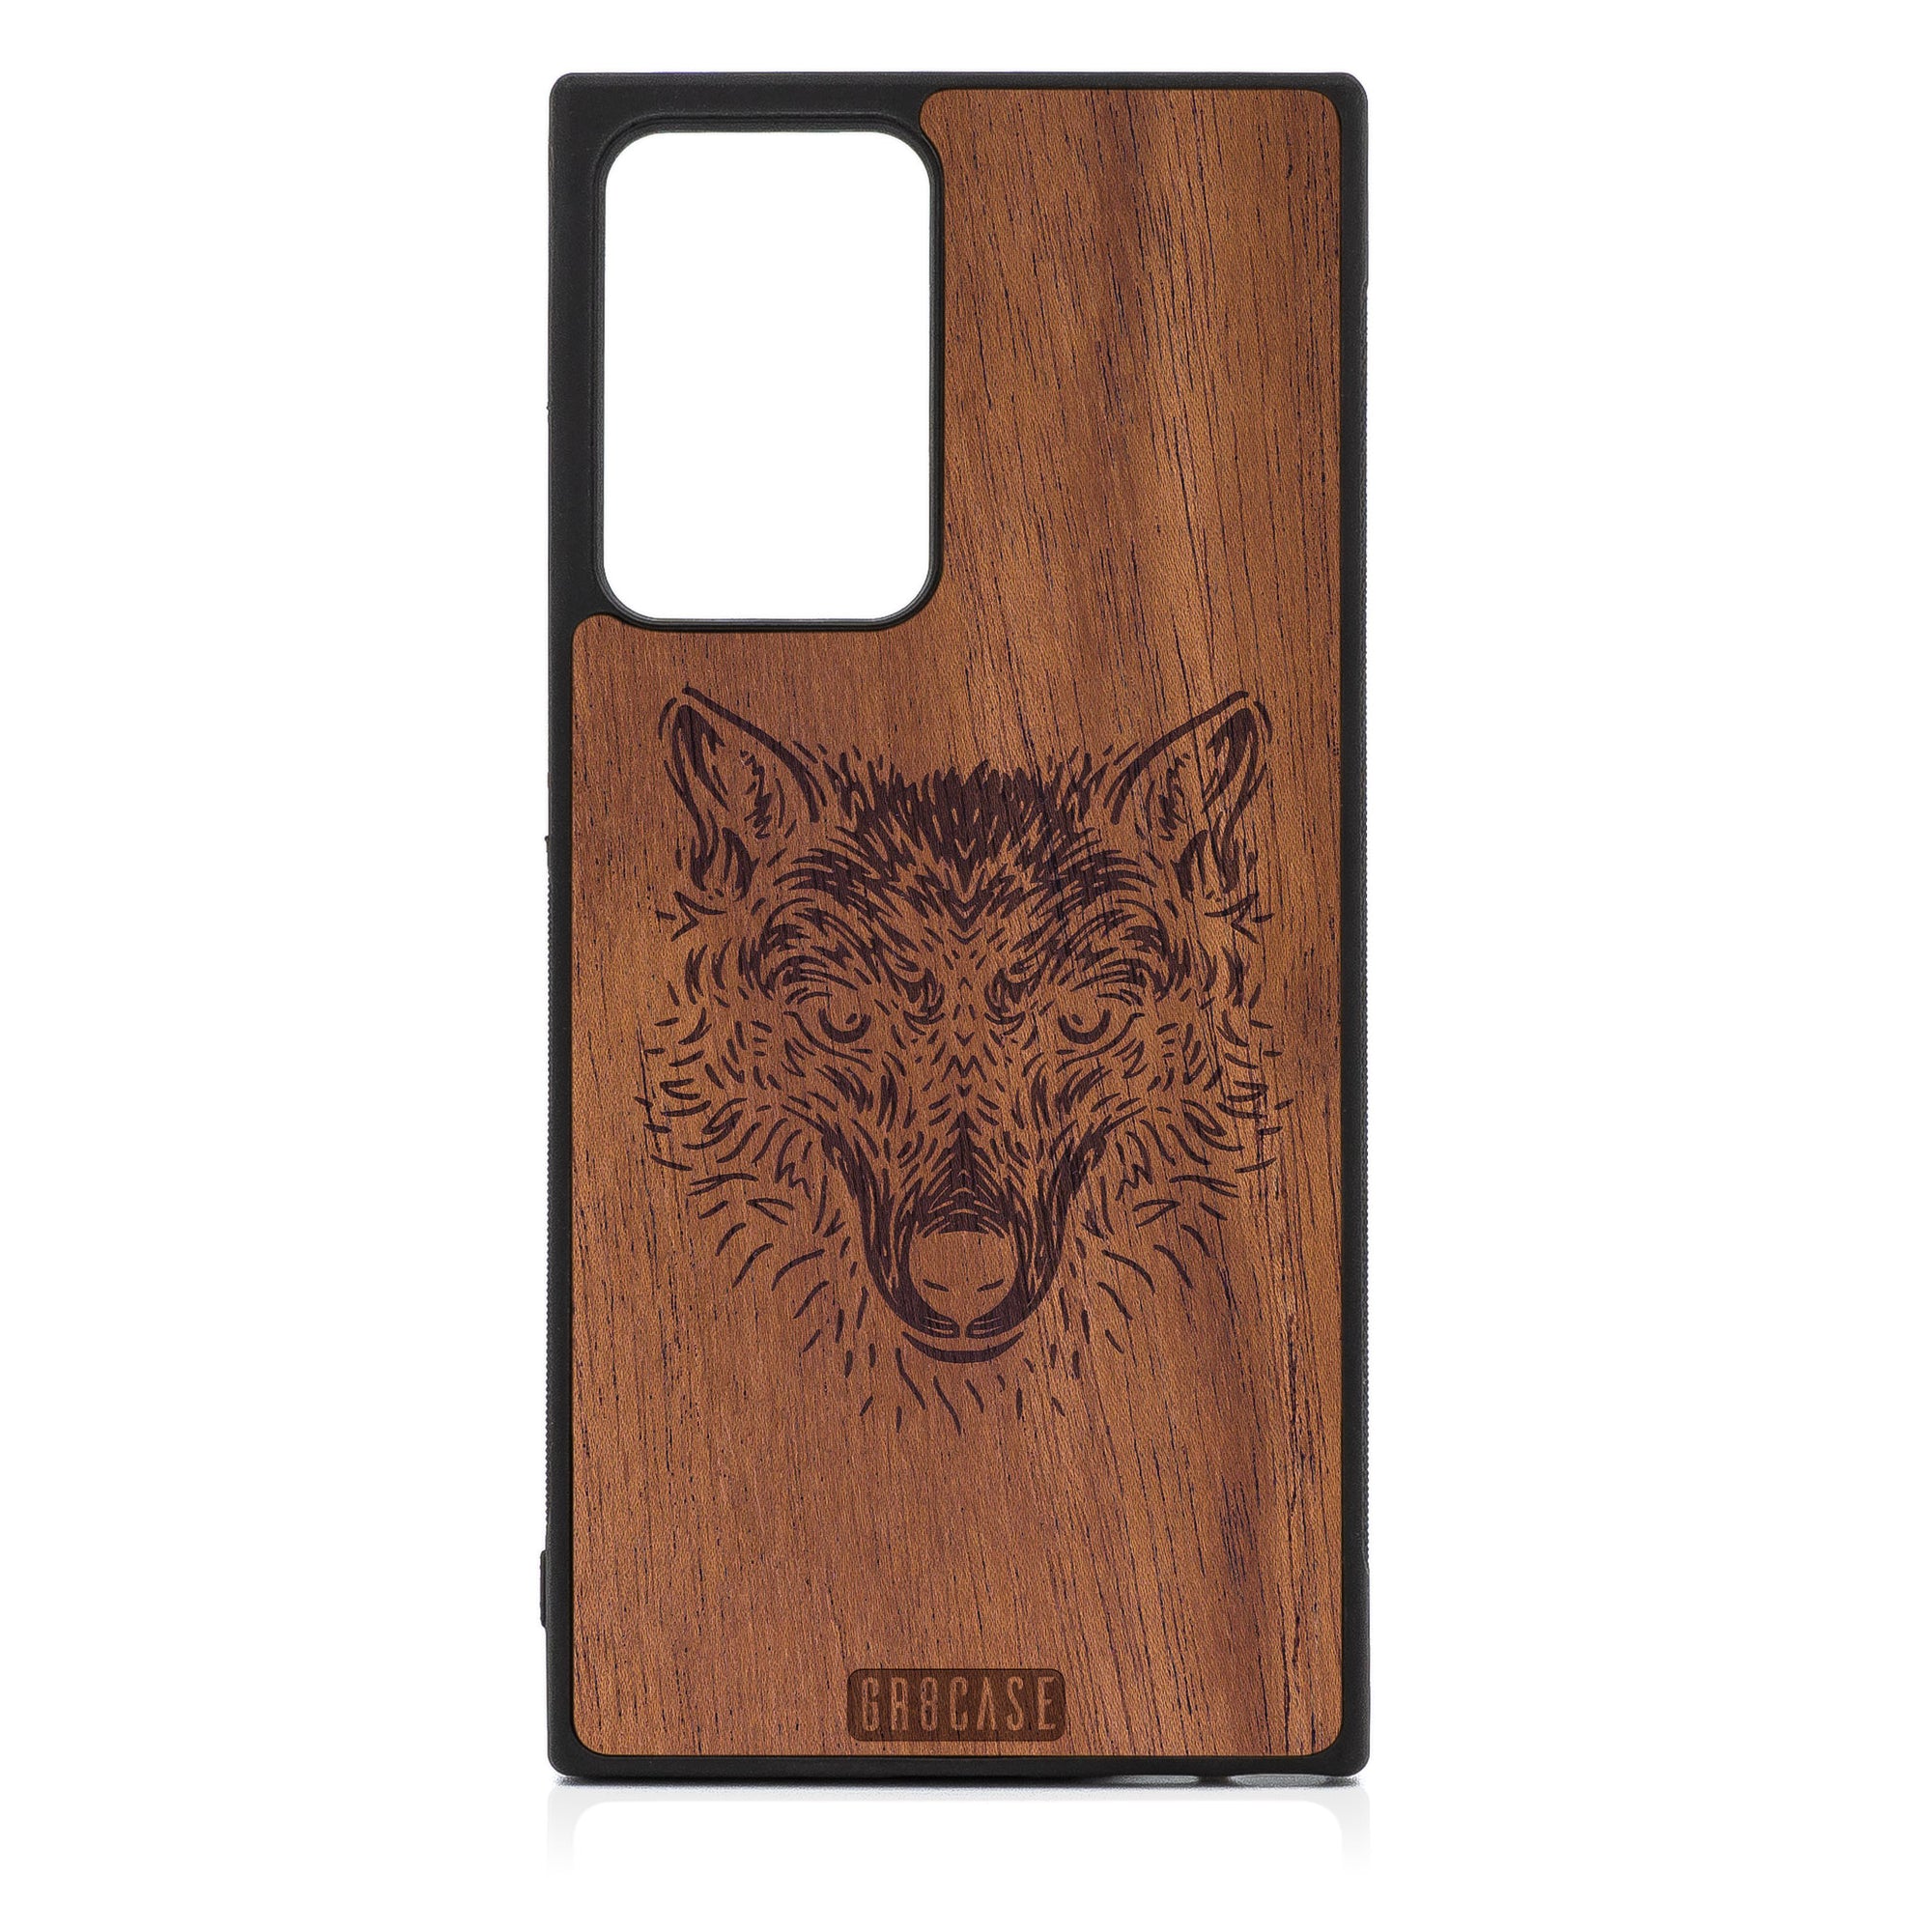 Furry Wolf Design Wood Case For Samsung Galaxy Note 20 Ultra